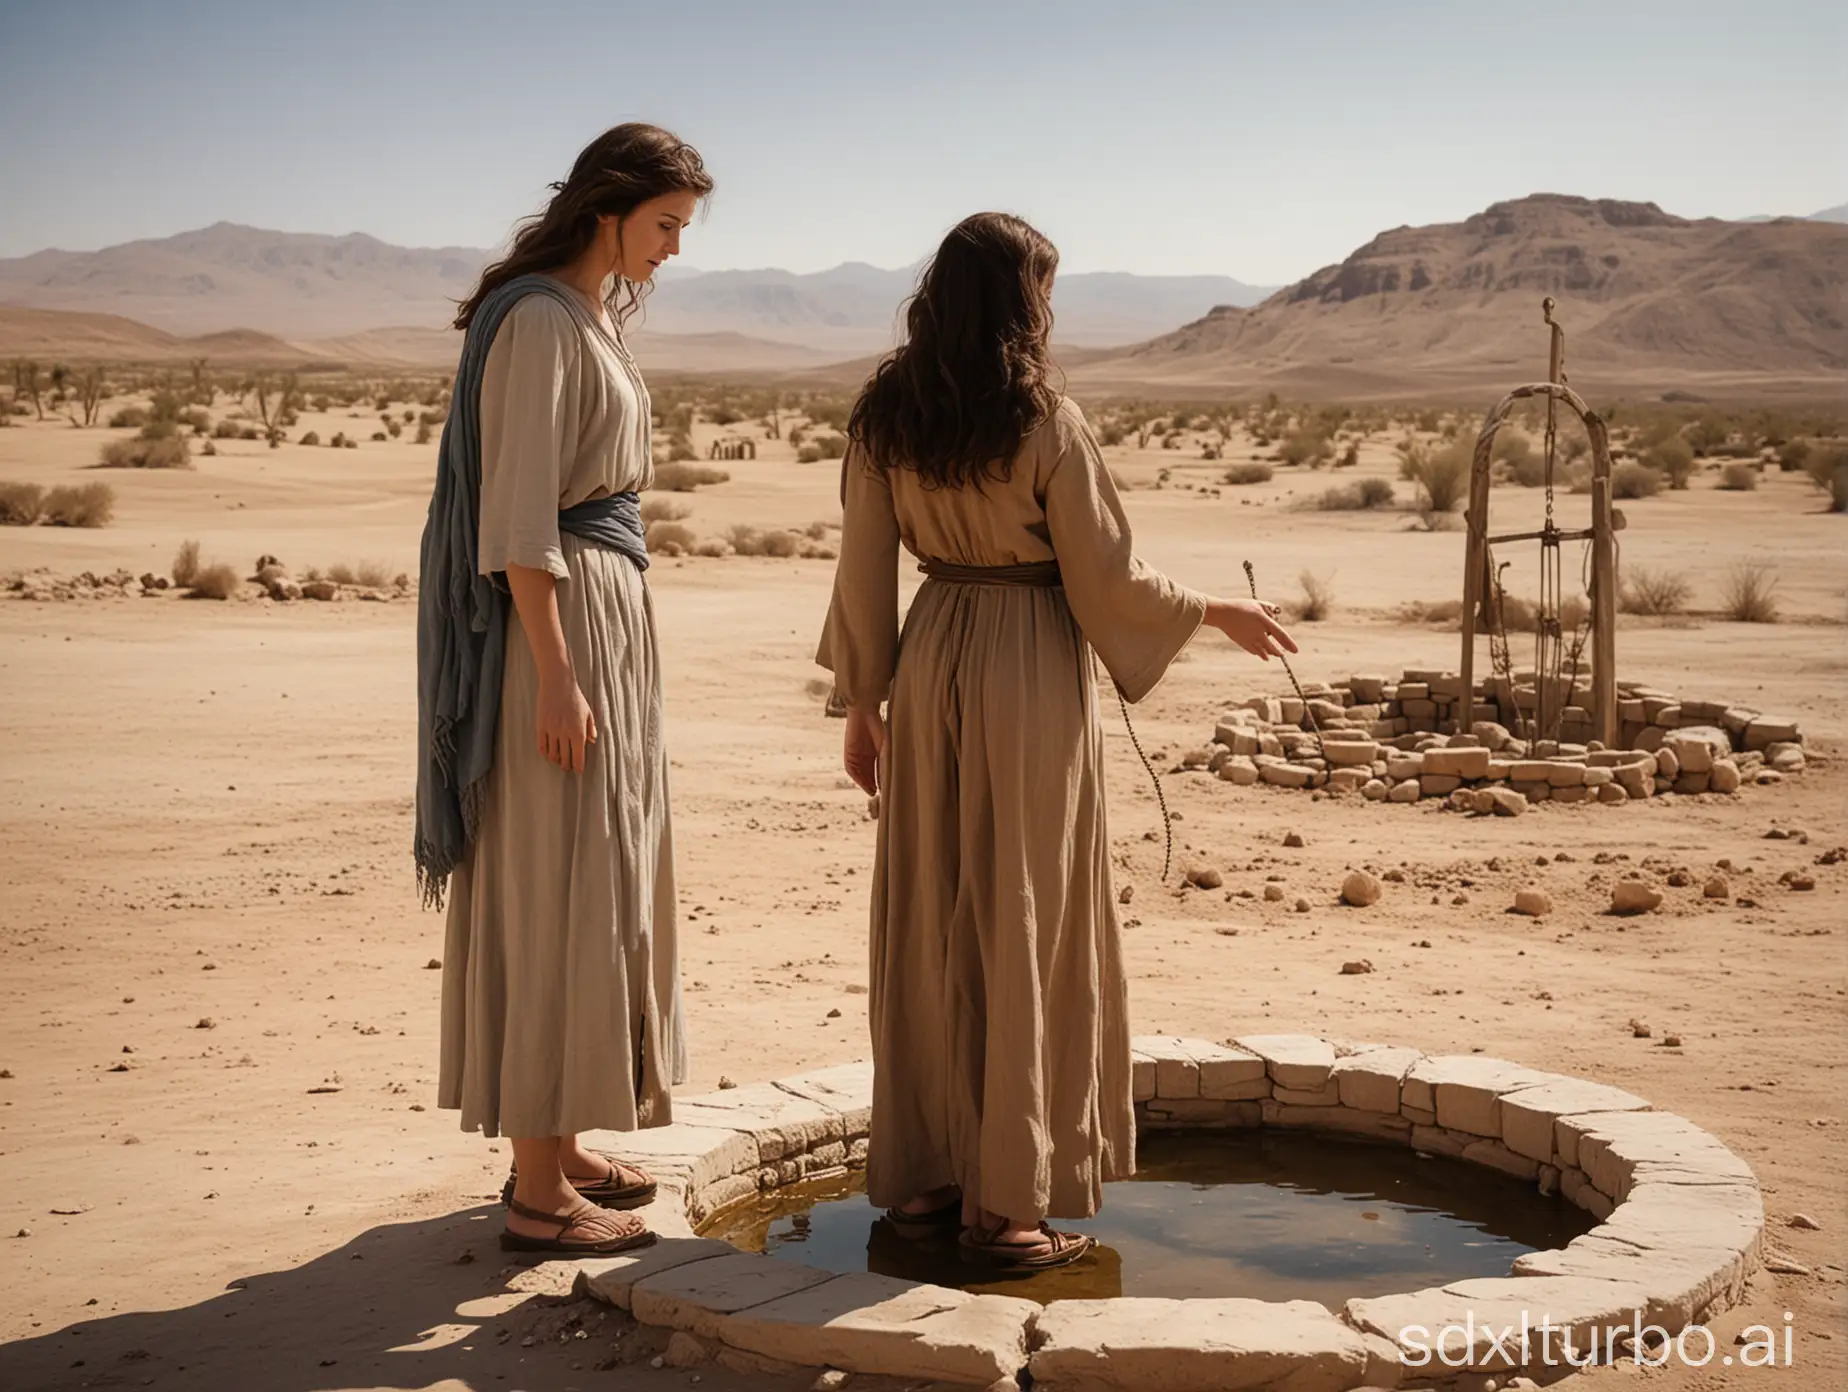 woman from biblical times looking at well in the desert